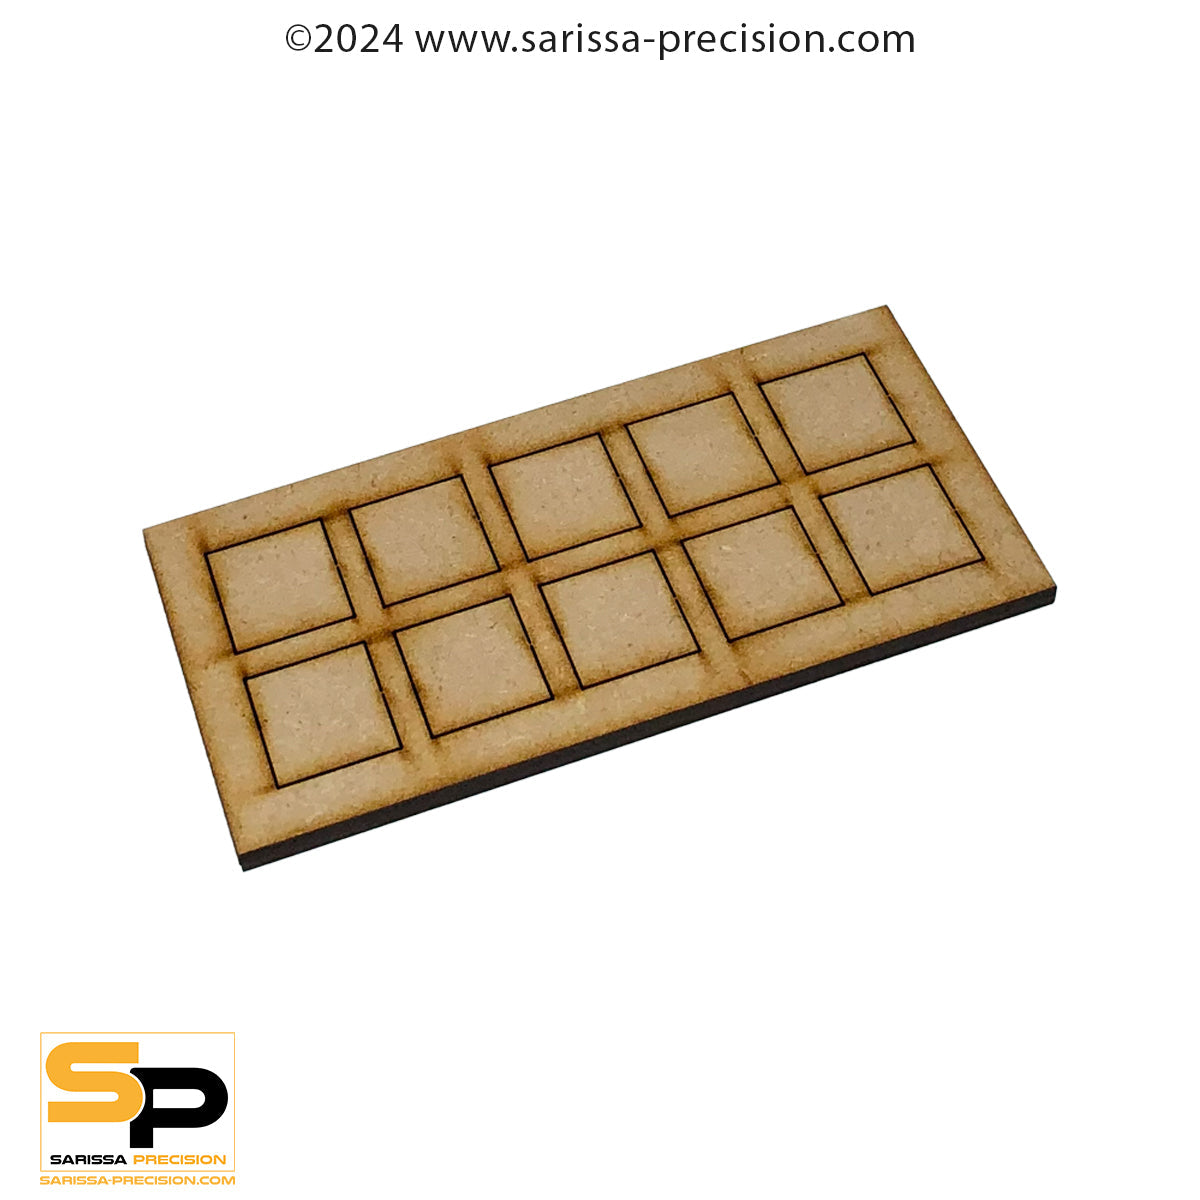 11 x 8 25x25mm Conversion Tray for 20x20mm bases